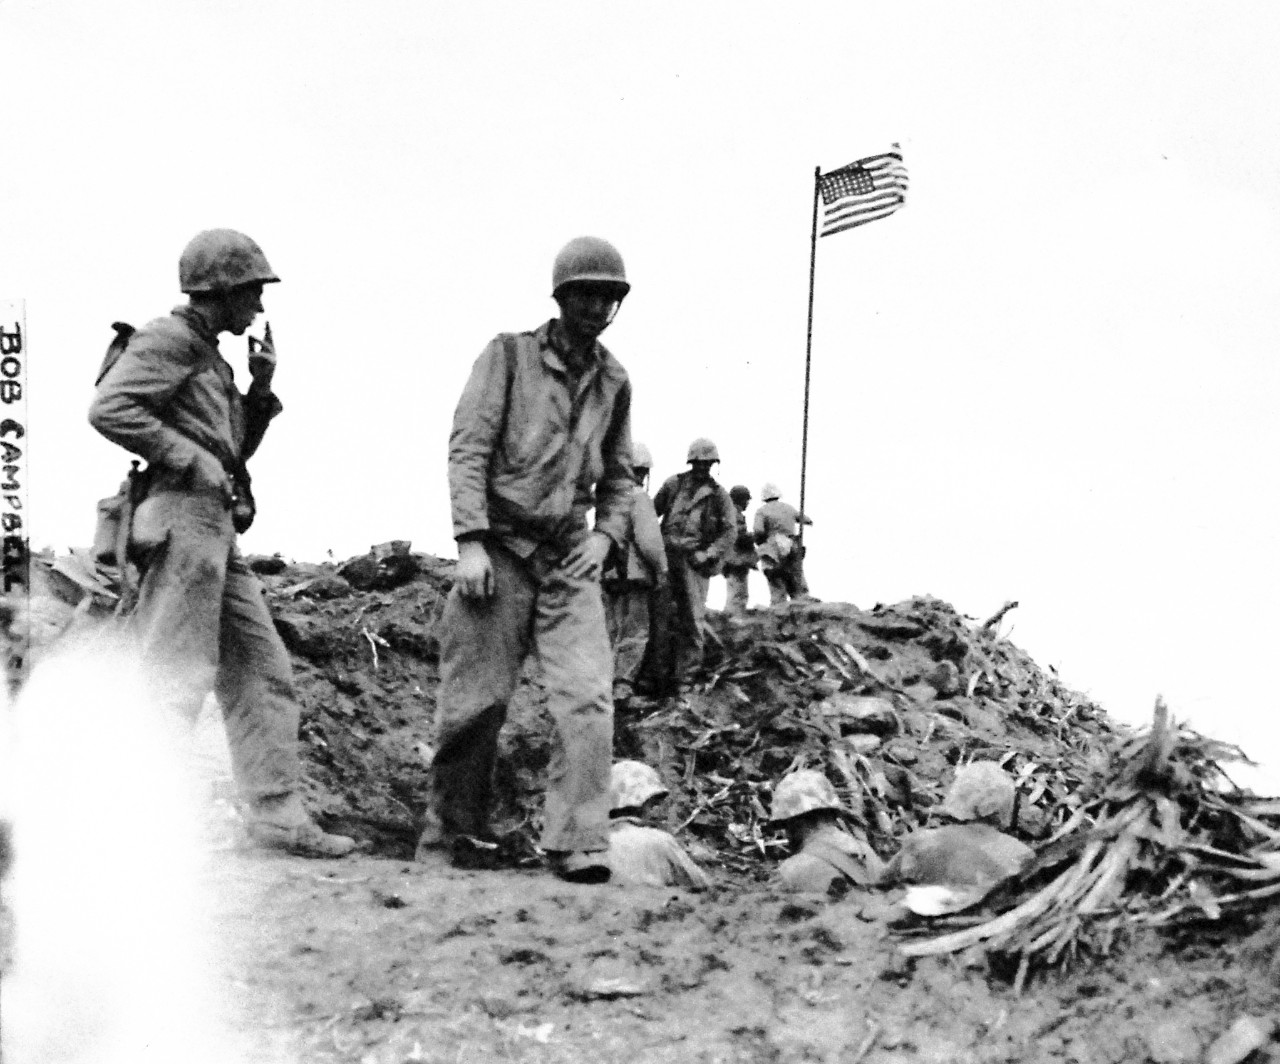 127-GW-319-112715:   Iwo Jima Operations,  February 1945.  Group by the flag raised on Mount Surbachi by Marines of the Fifth Marine Division.   Photographed by Bob Campbell, February 23, 1945.   Official U.S. Marine Corps Photograph, now in the collections of the National Archives.  (2016/09/06).